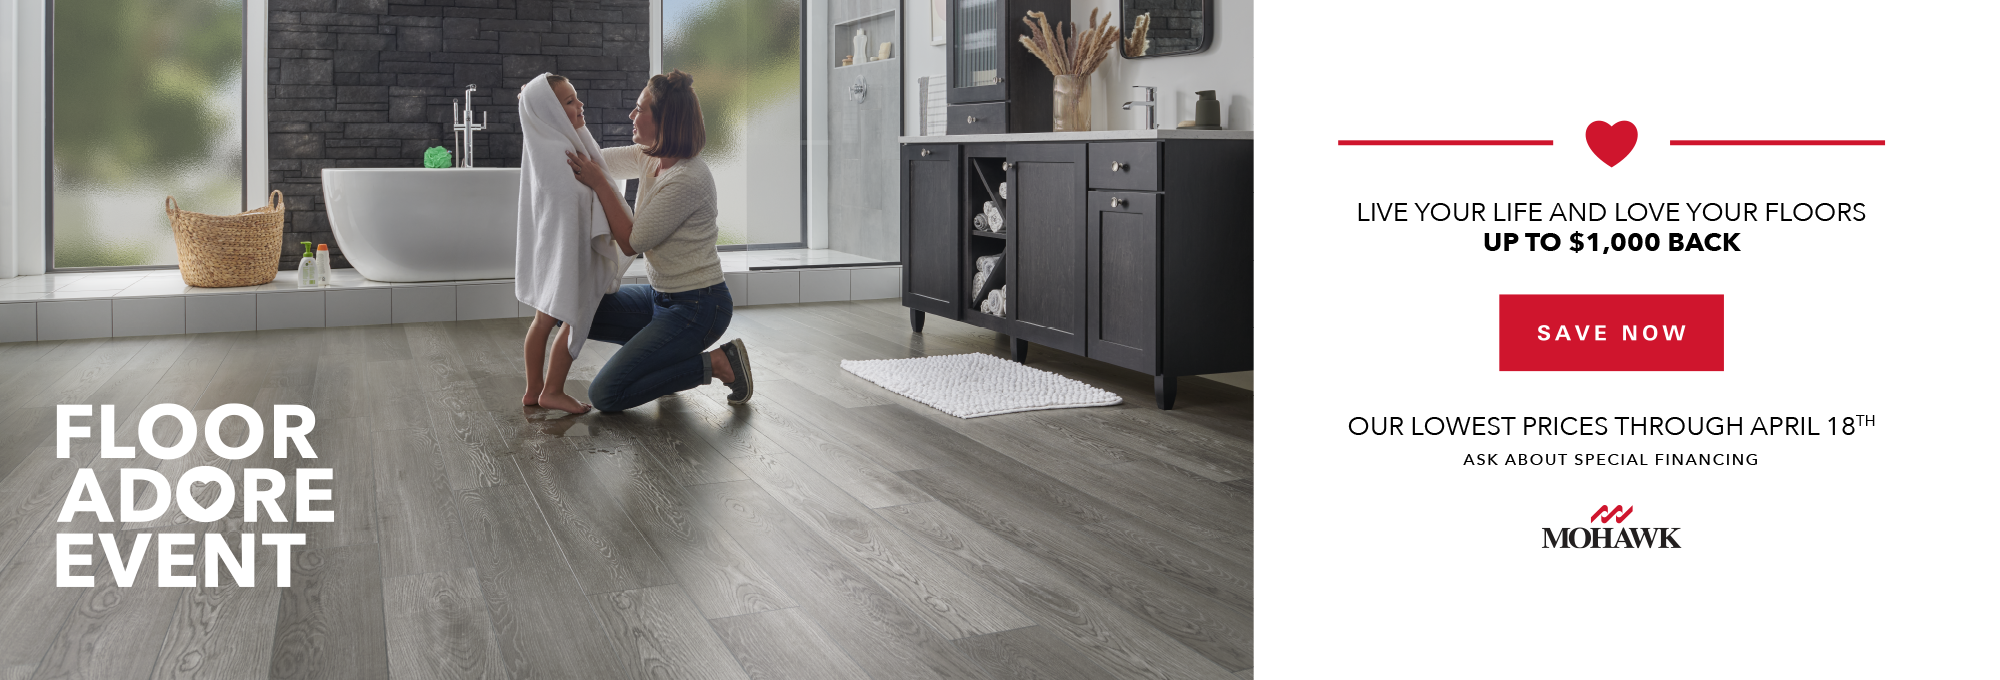 Live your life and love your floors, with up to $1,000 back! Our lowest prices through April 18th - ask about special financing today!